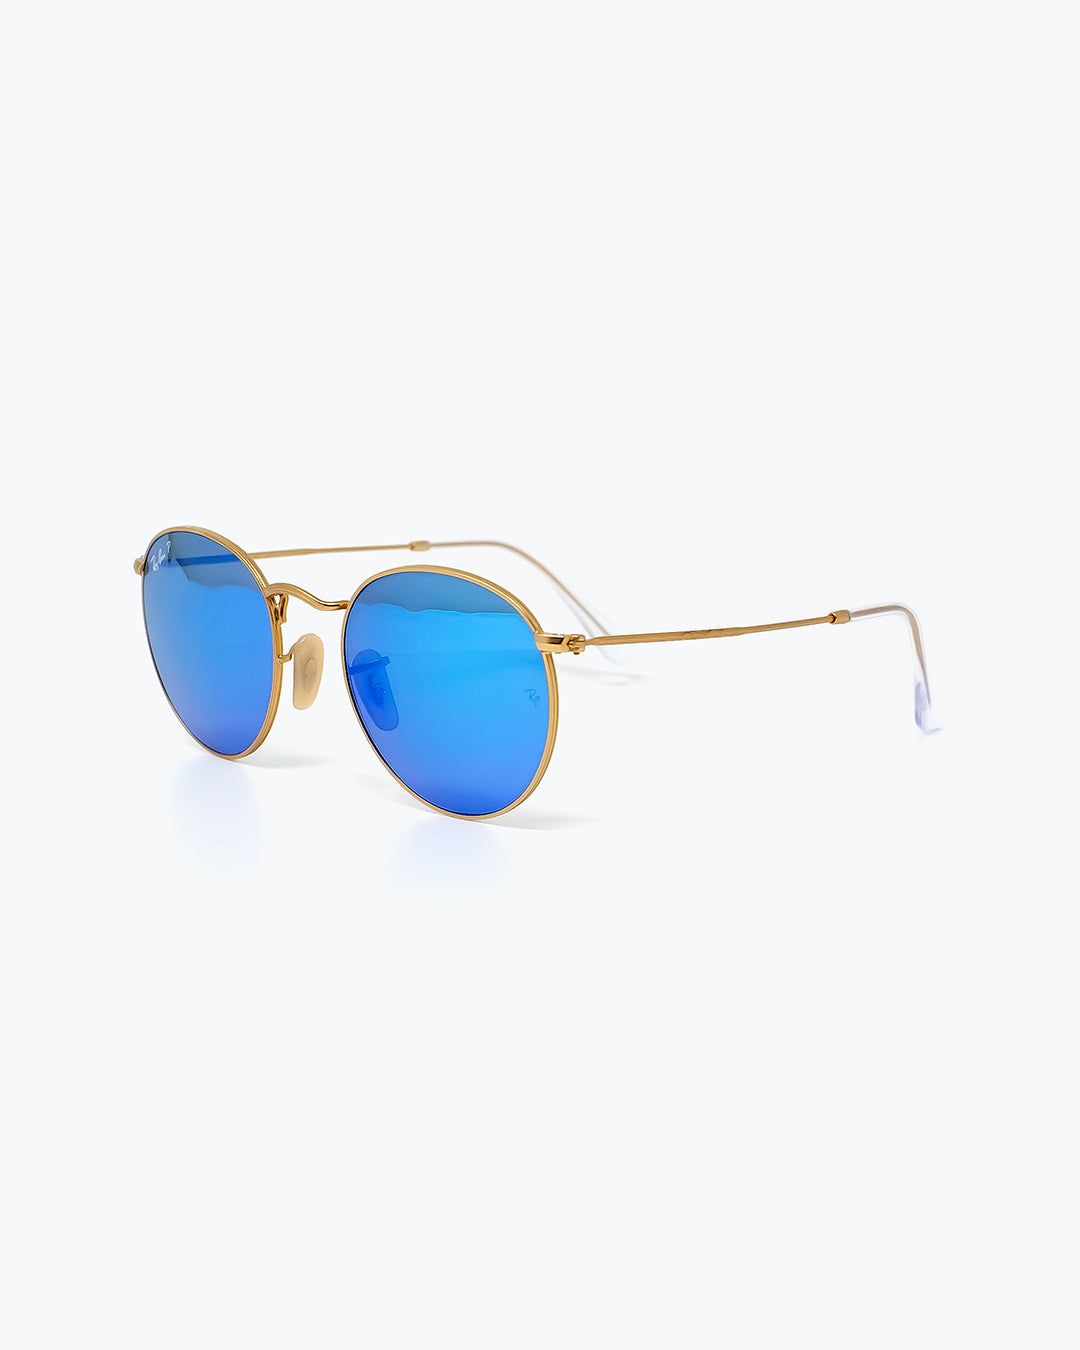 Ray Ban Round Metal - Model RB3447